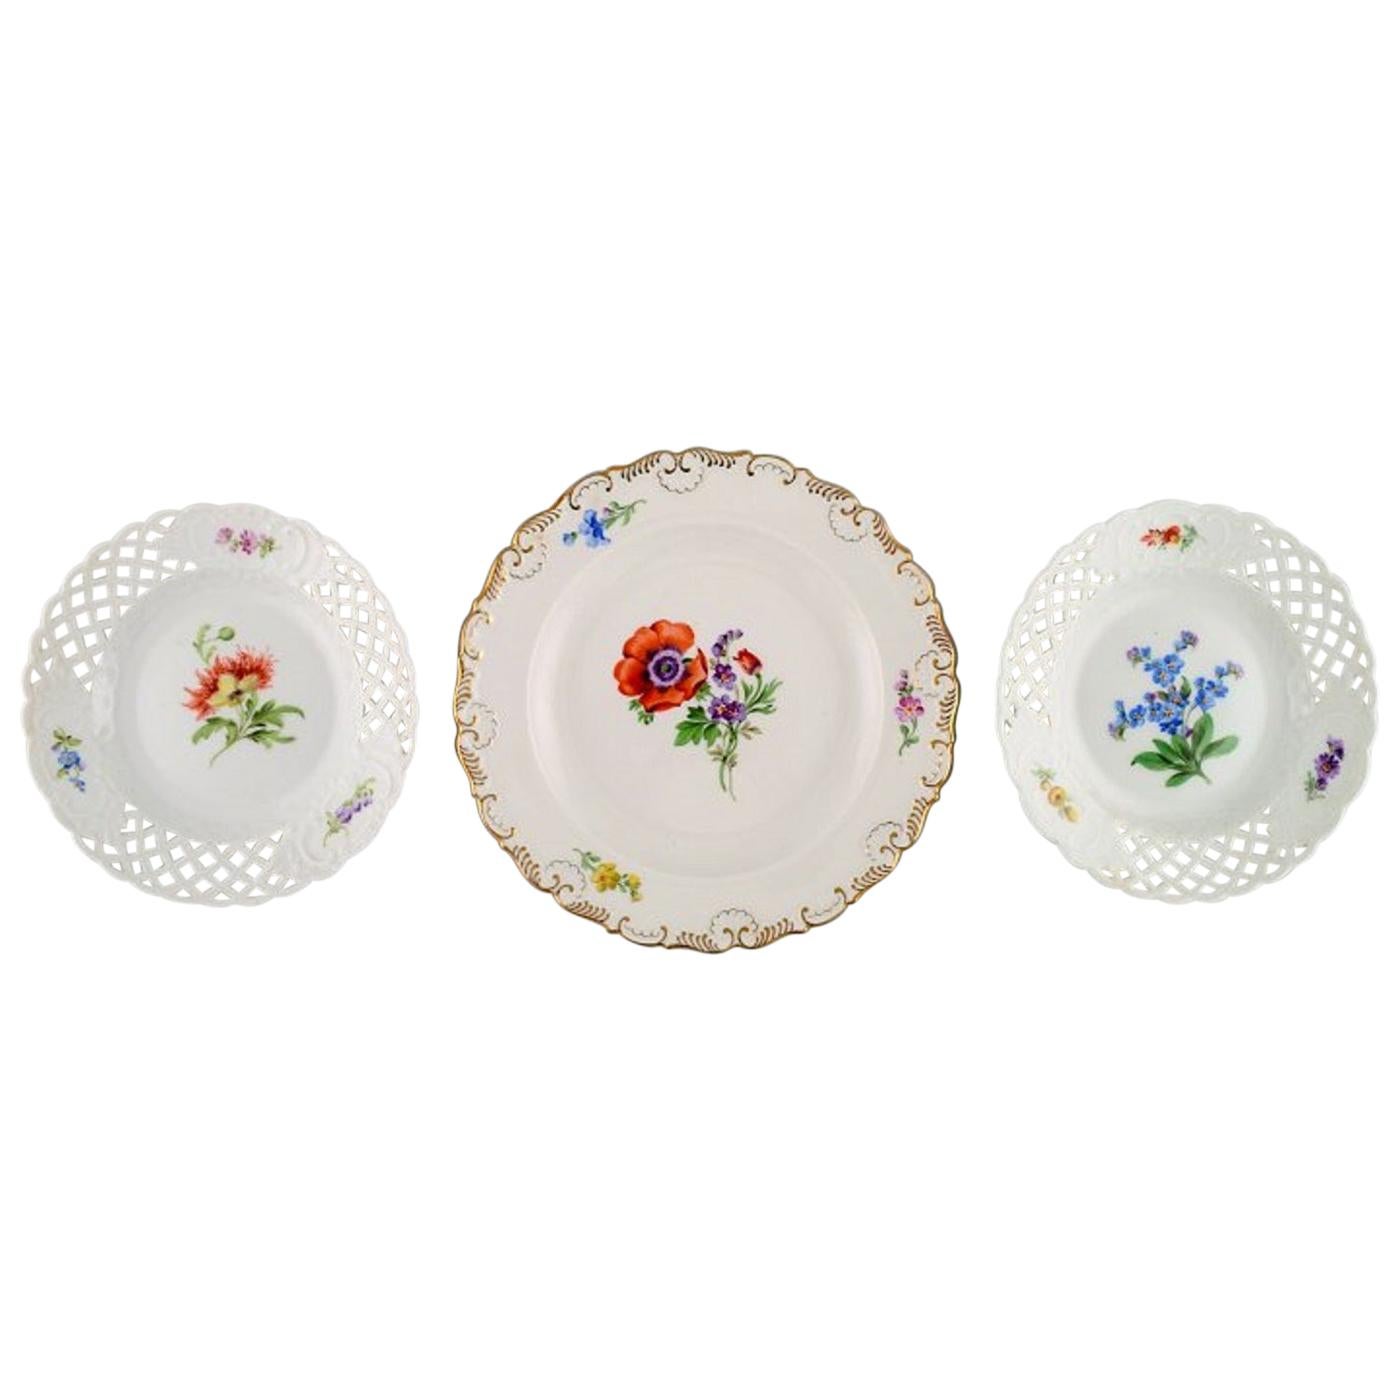 Three Antique Meissen Plates in Hand-Painted Porcelain with Floral Motifs For Sale